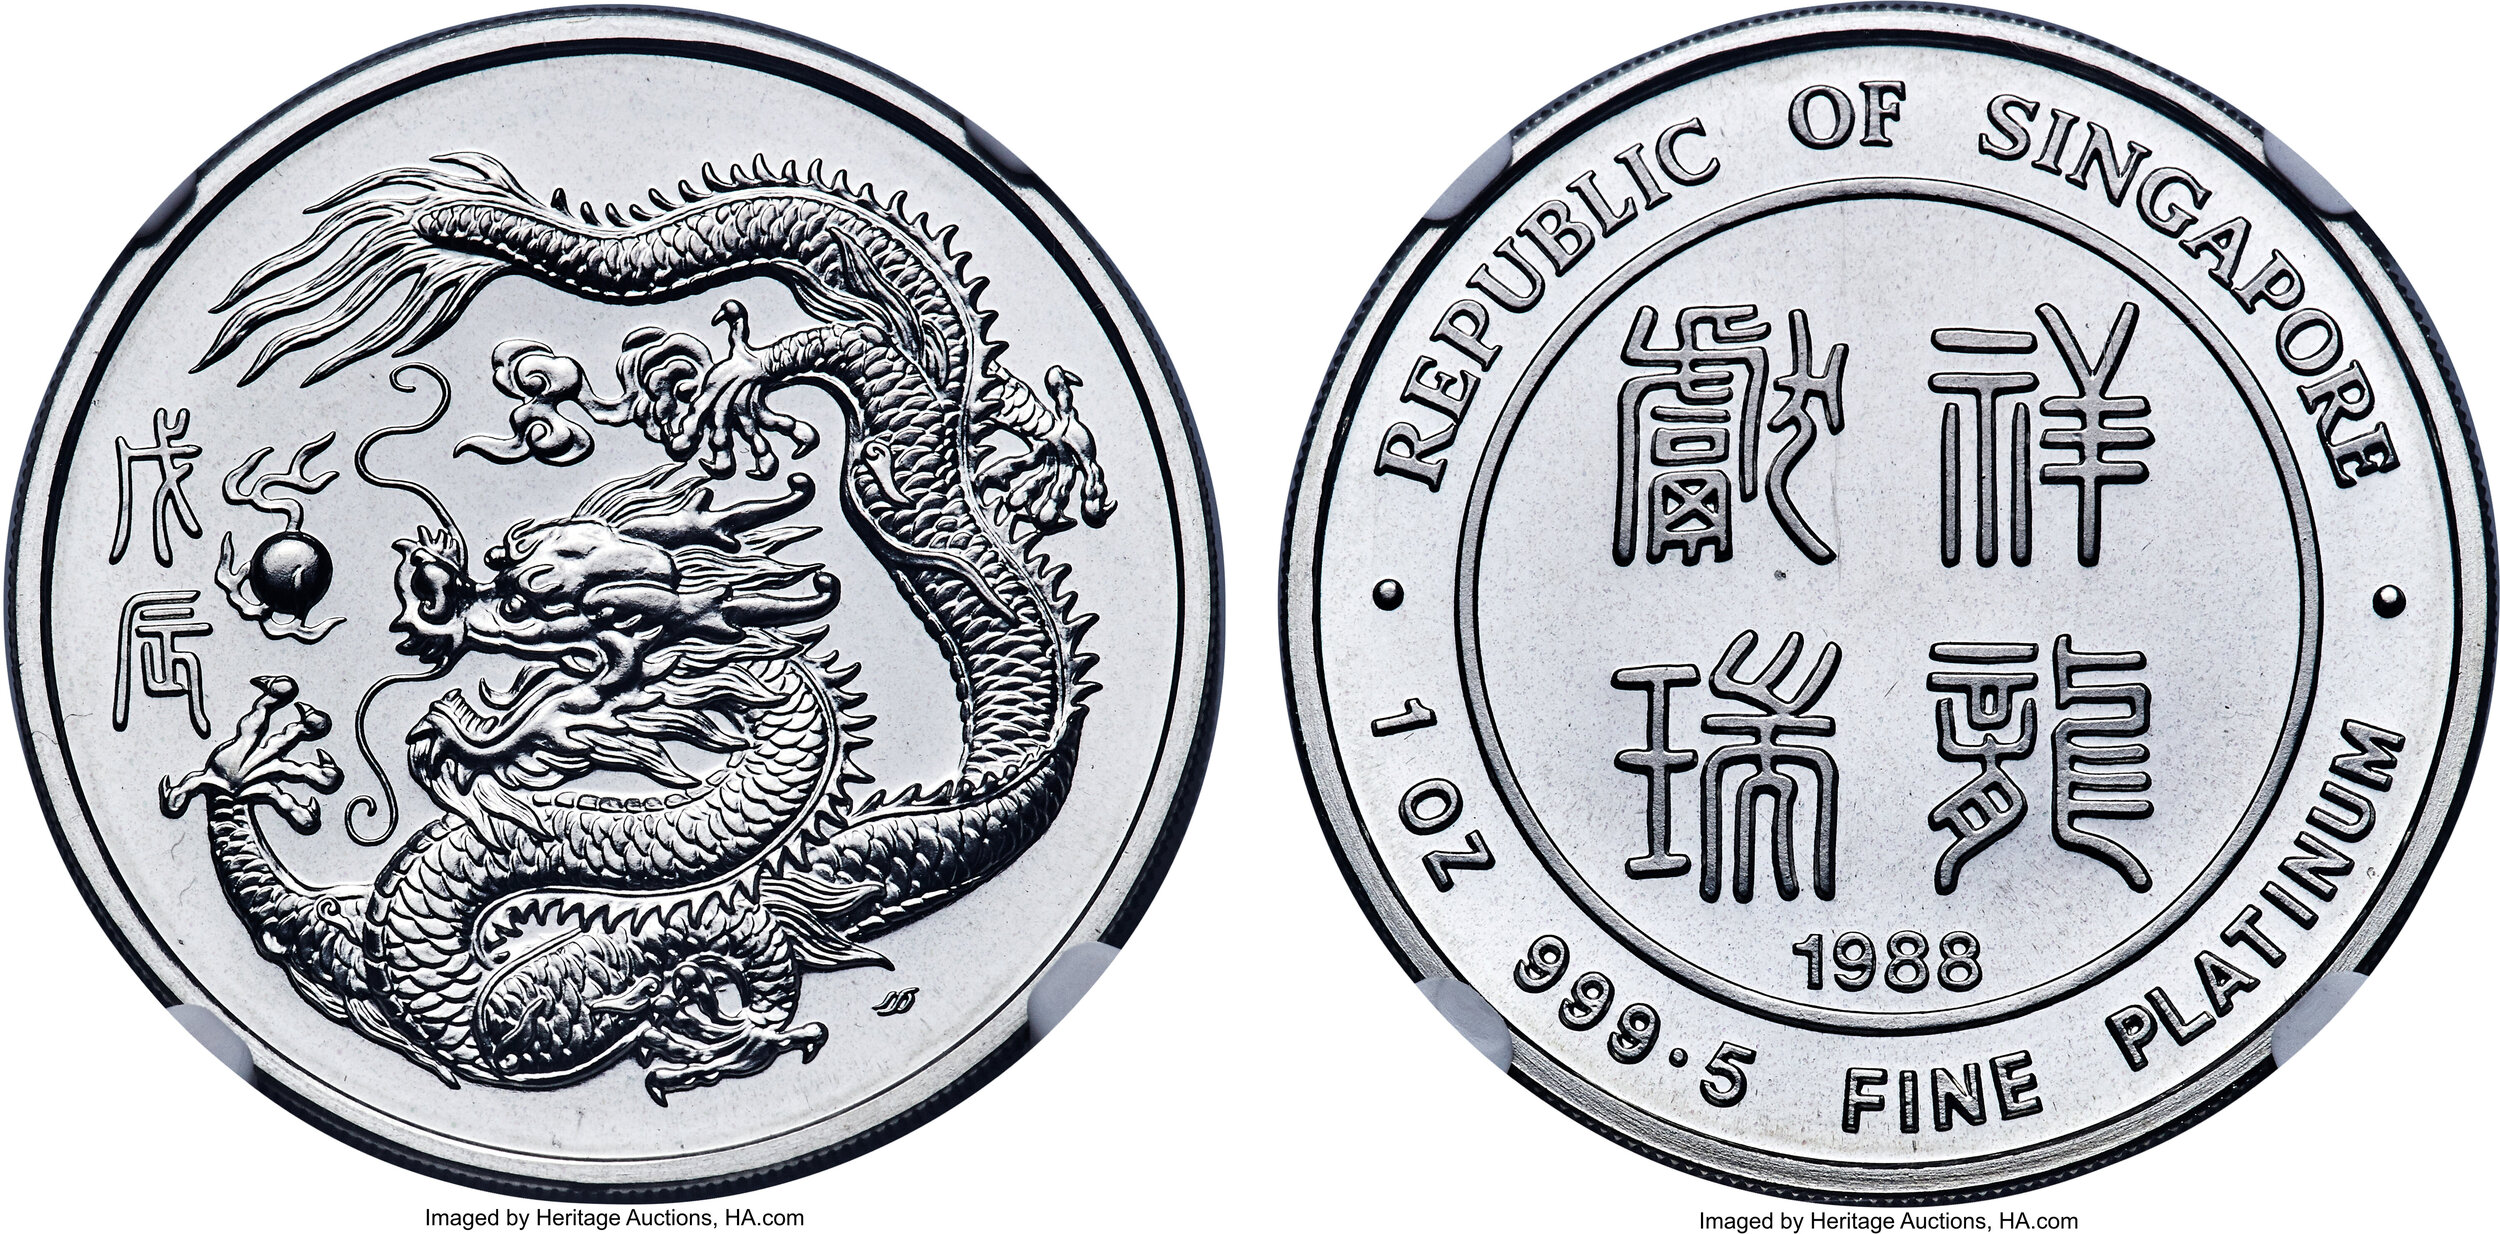 NumisBids: Heritage World Coin Auctions Hong Kong Signature Sale 